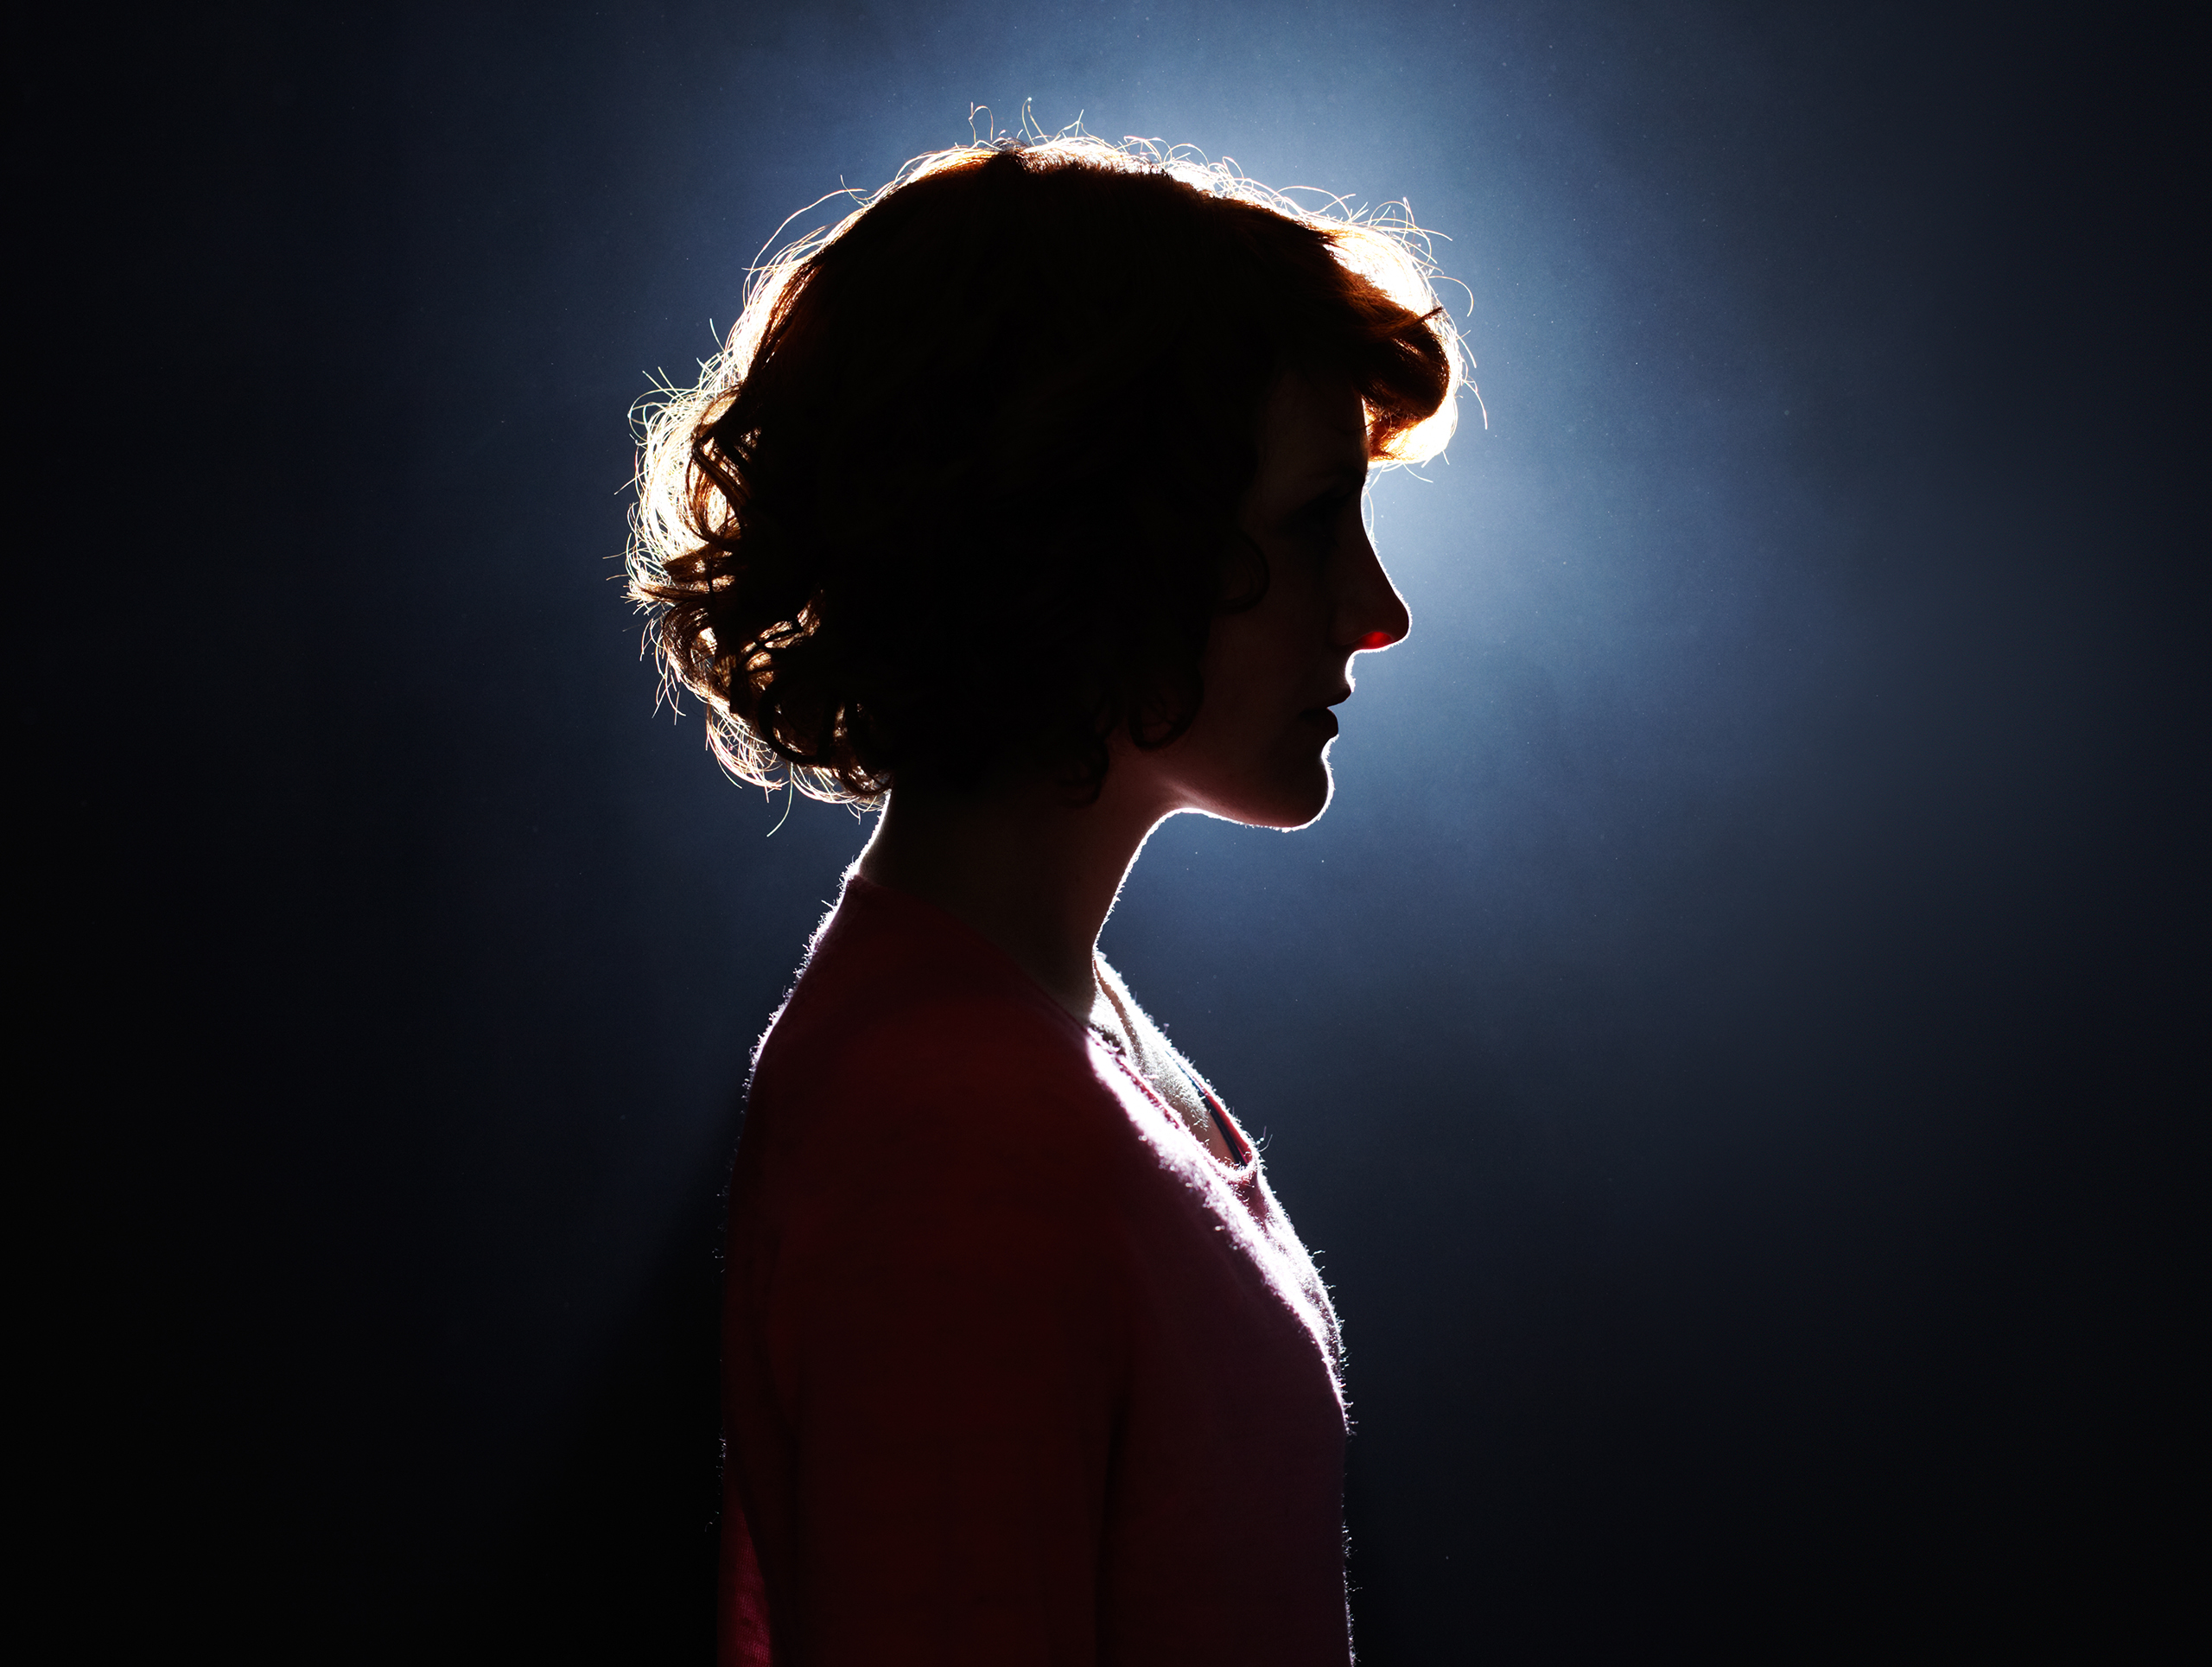 Silhouette of young woman.